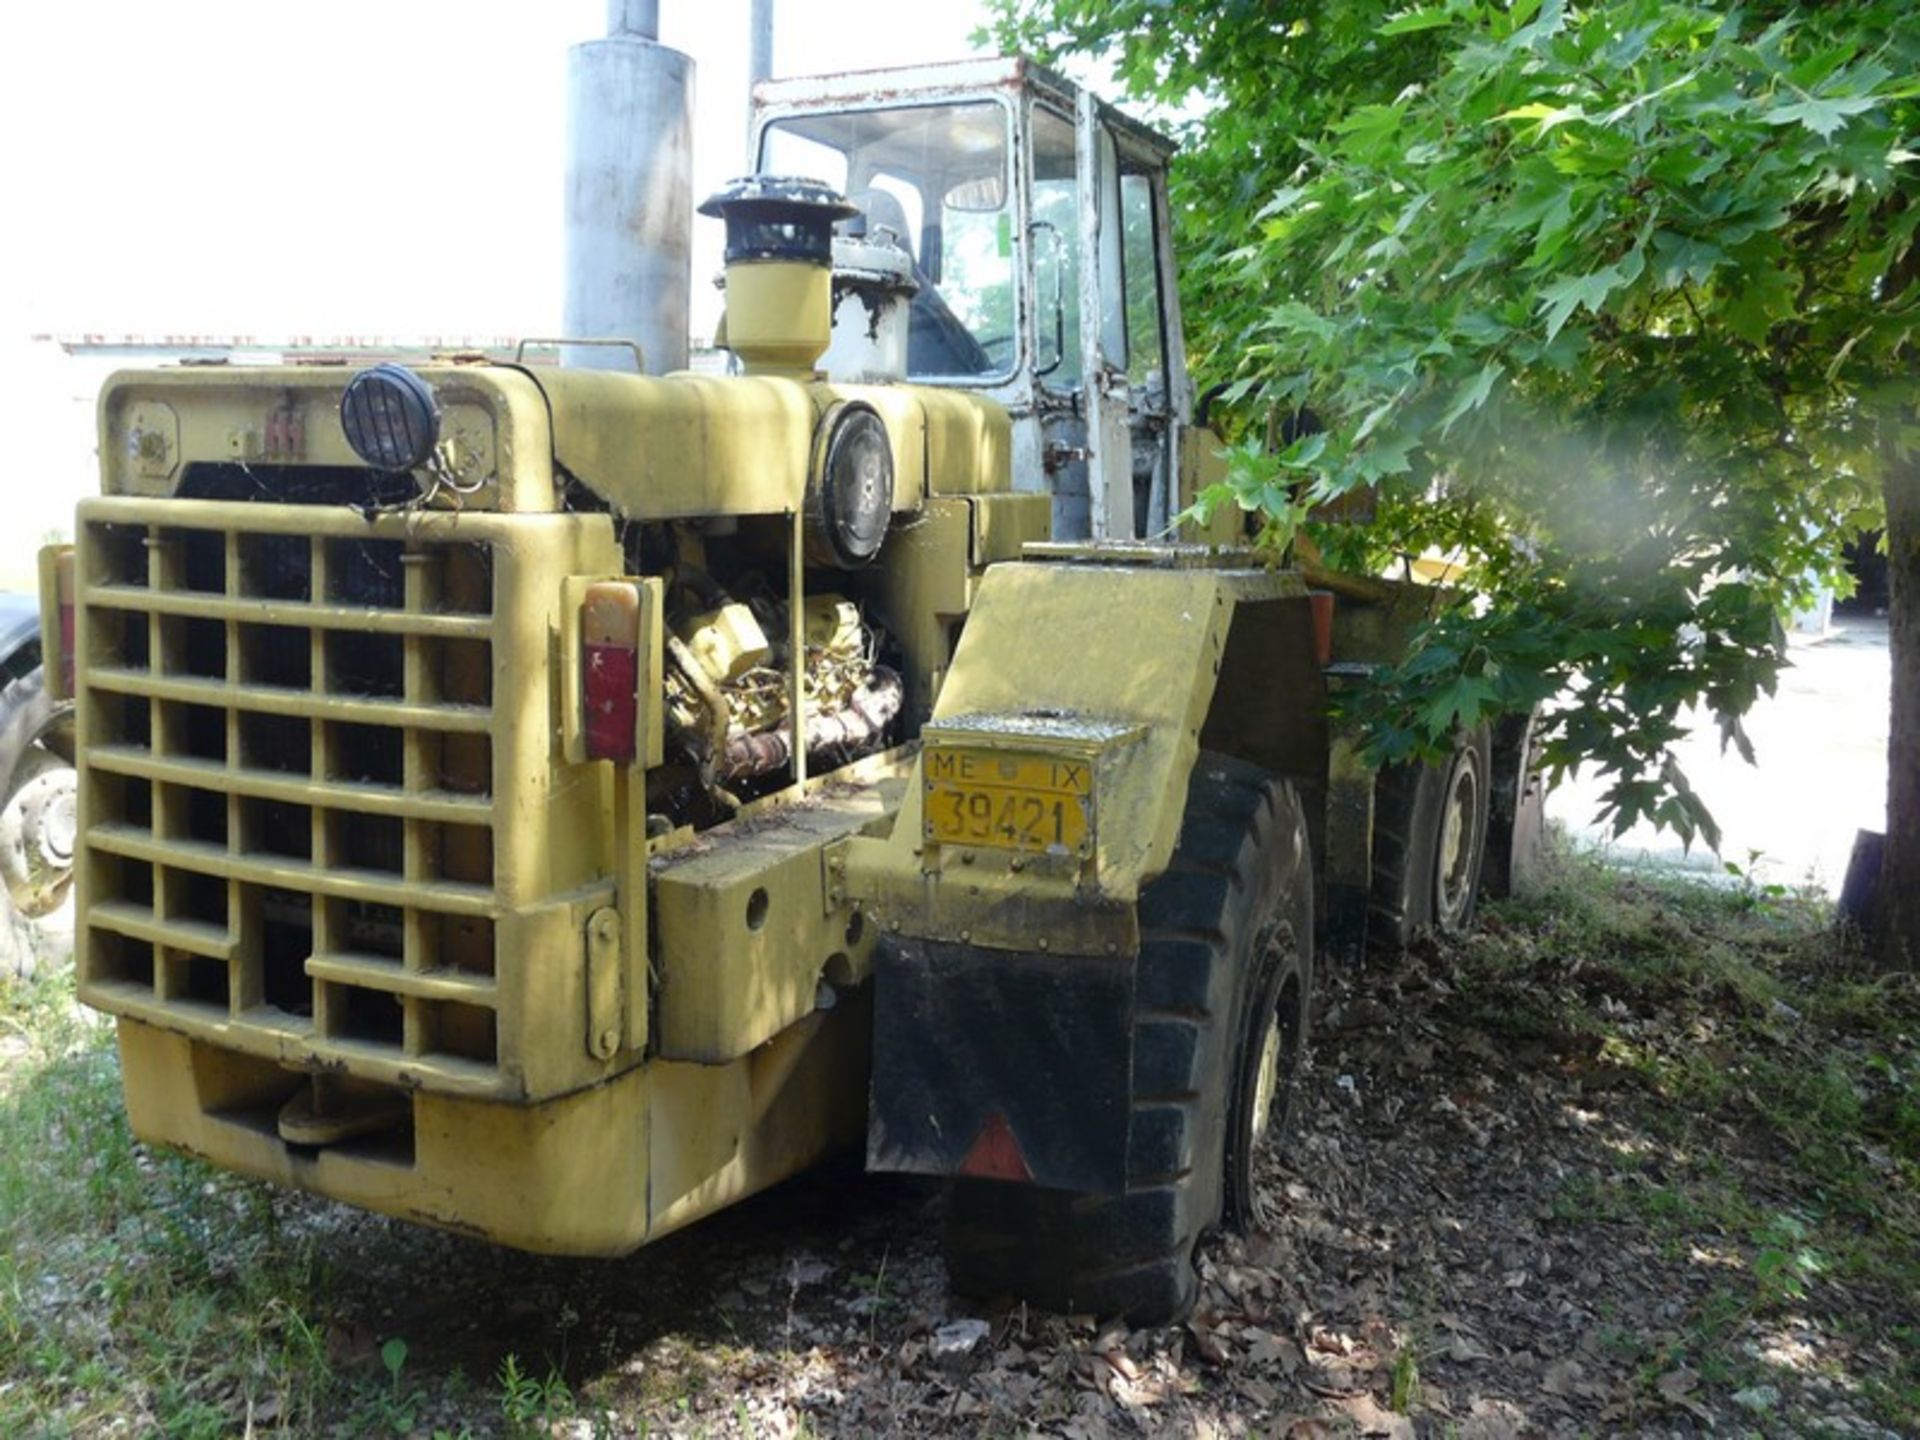 INTERNATIONAL loader CHARGER 1996, HRS: 34166, REG: ME 39421, Year: 1996 (Located in Greece - - Image 6 of 11